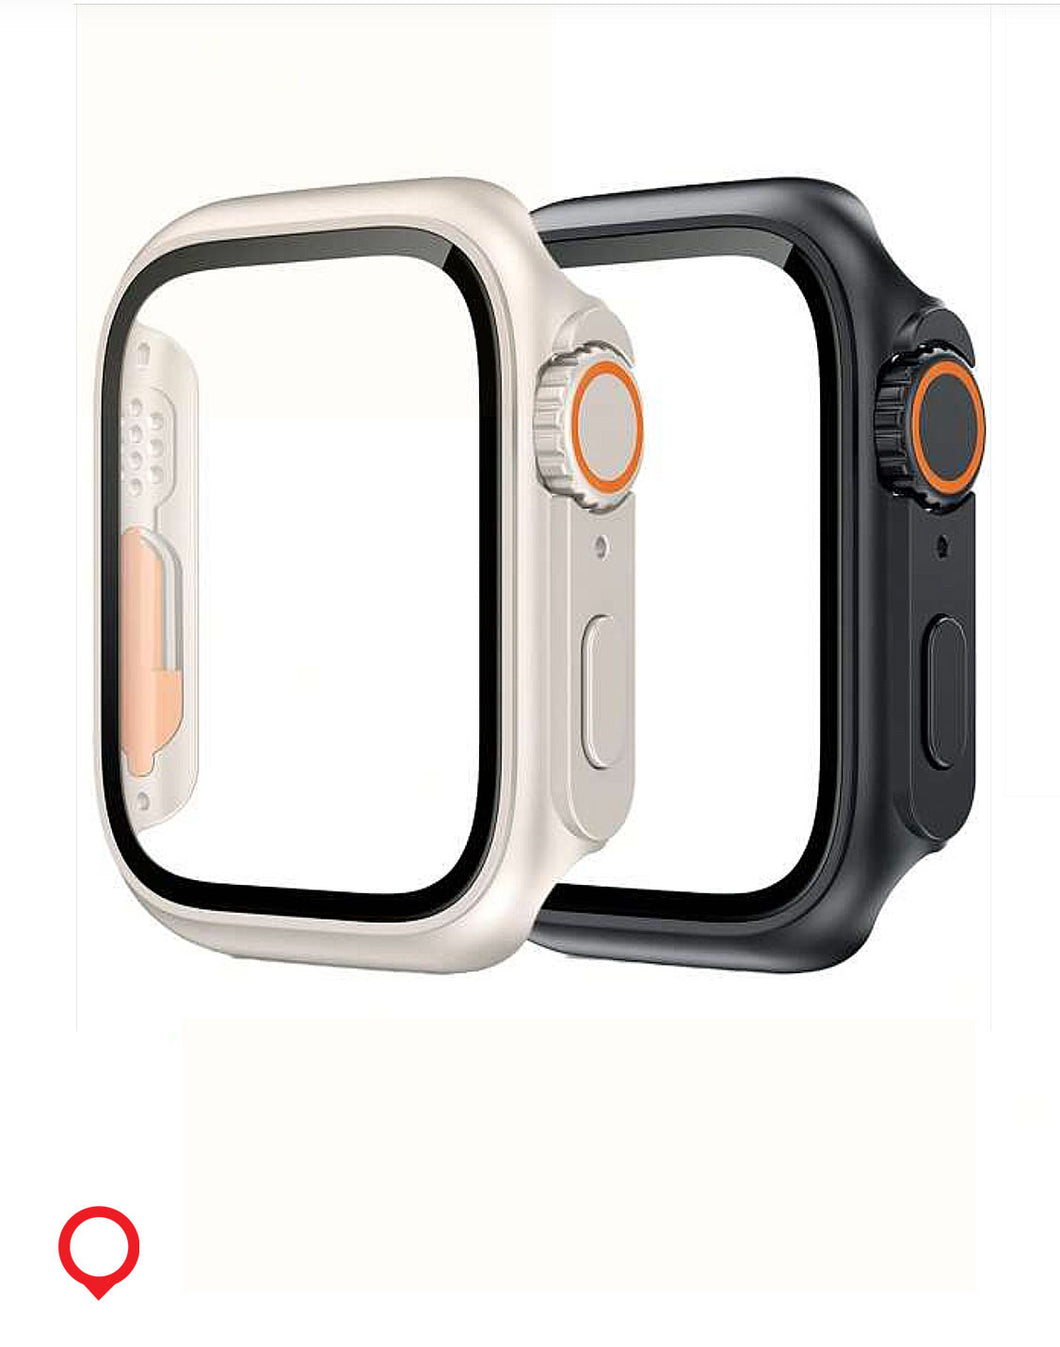 mobi.D (mobile digital) Apple Watch to Ultra Protector Case (Type 1)